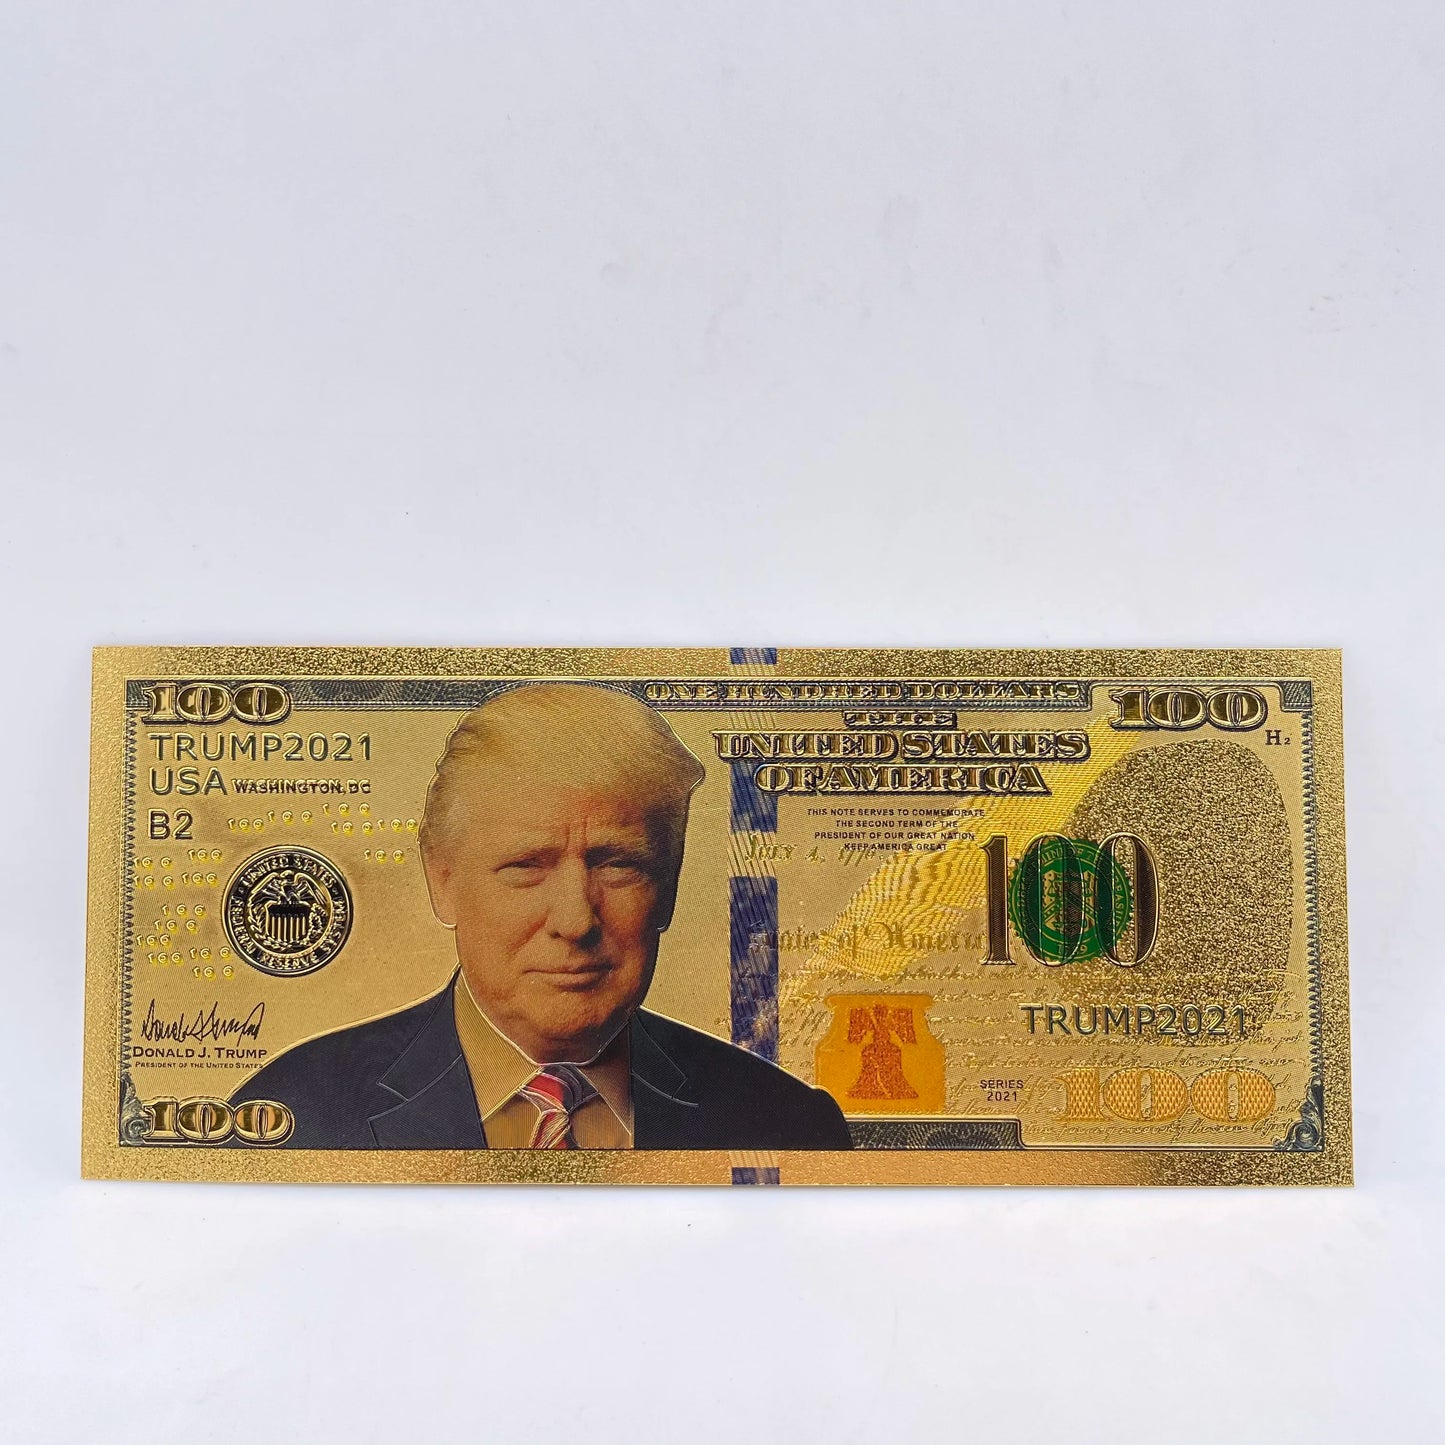 24k Color Gold Banknote Donald Trump Gold Plated $1000 US Commemorative Banknote Golden Tickets Home Decor Gifts for Collection